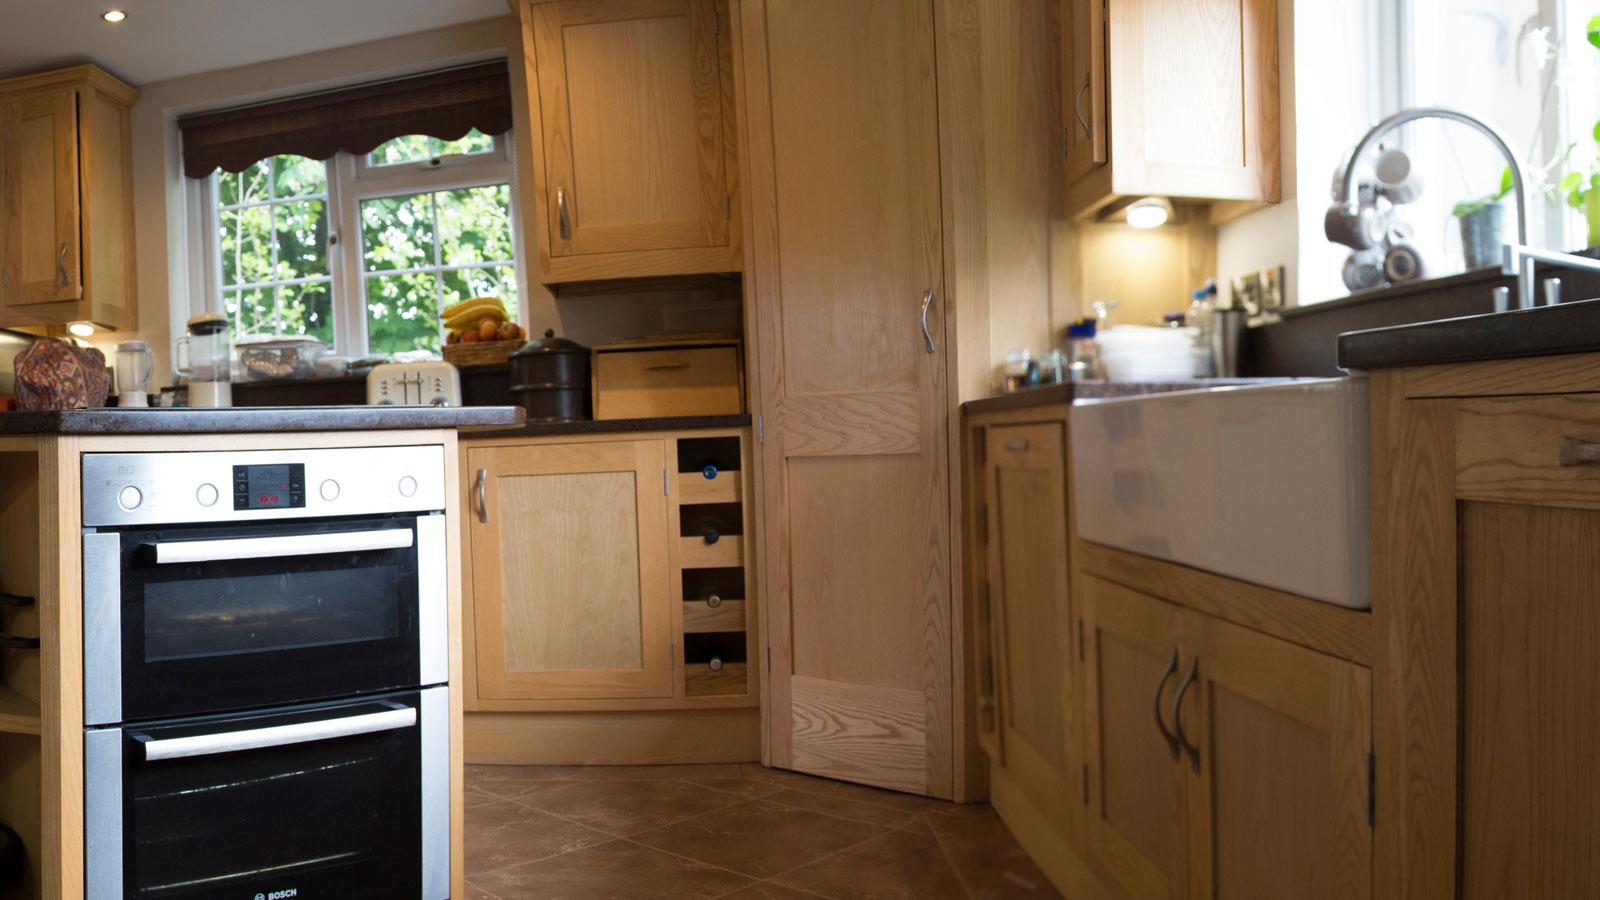 A farmhouse kitchen fit for a top chef